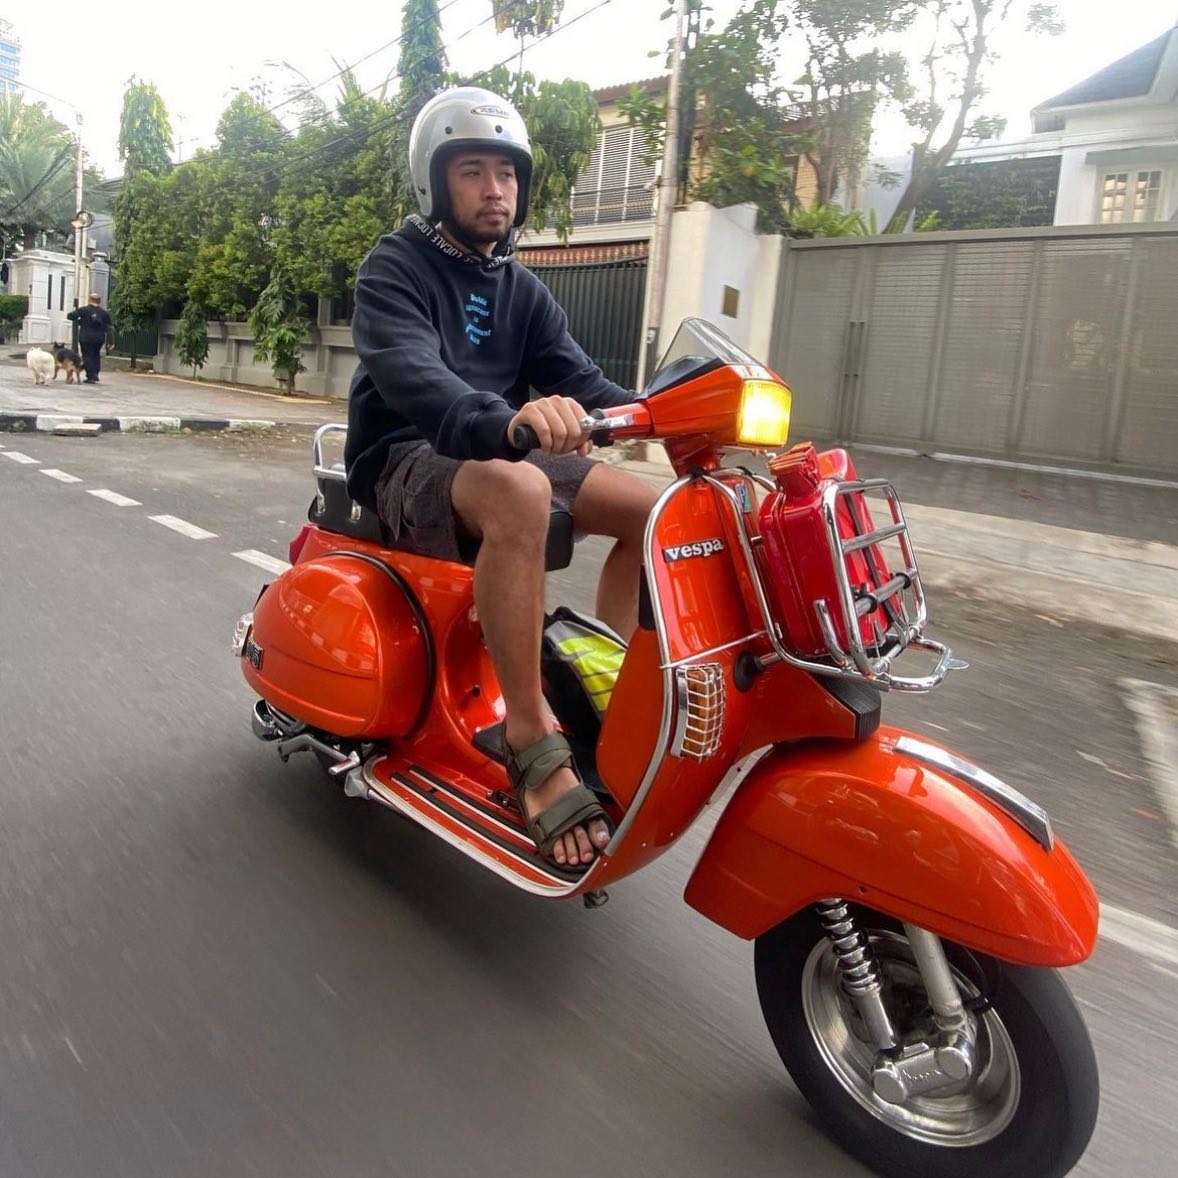 Orange Vespa Excel T5 custom

hashtag and mention @vespapxnet for feature repost Check website www.vespapx.net for more 

feature @putbal.id